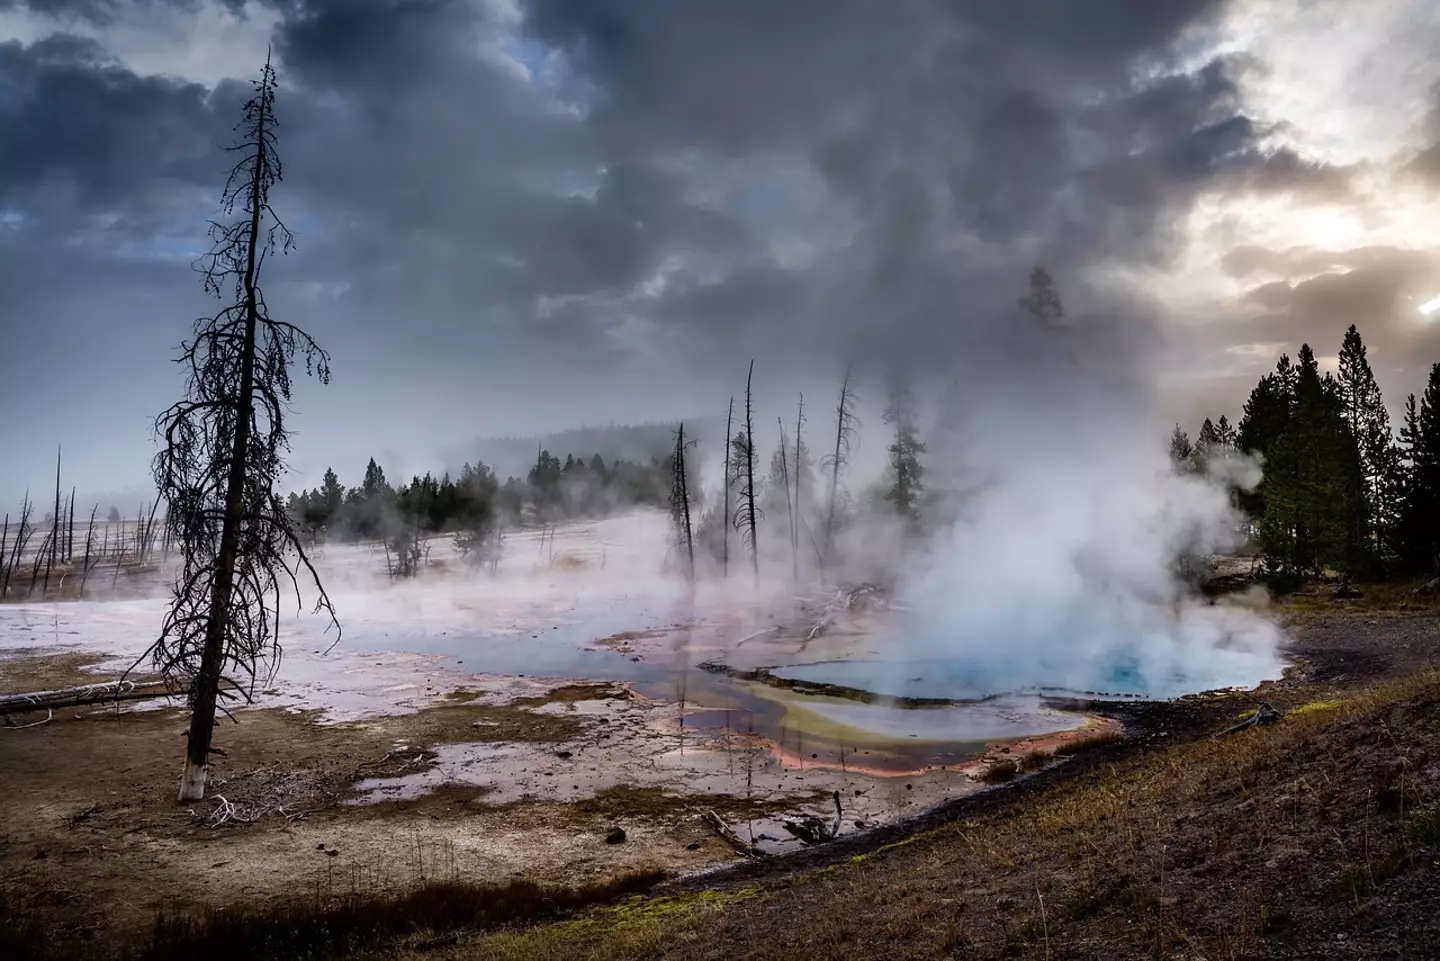 The hot springs in Yellowstone can reach temperatures of 96 degrees Celsius.